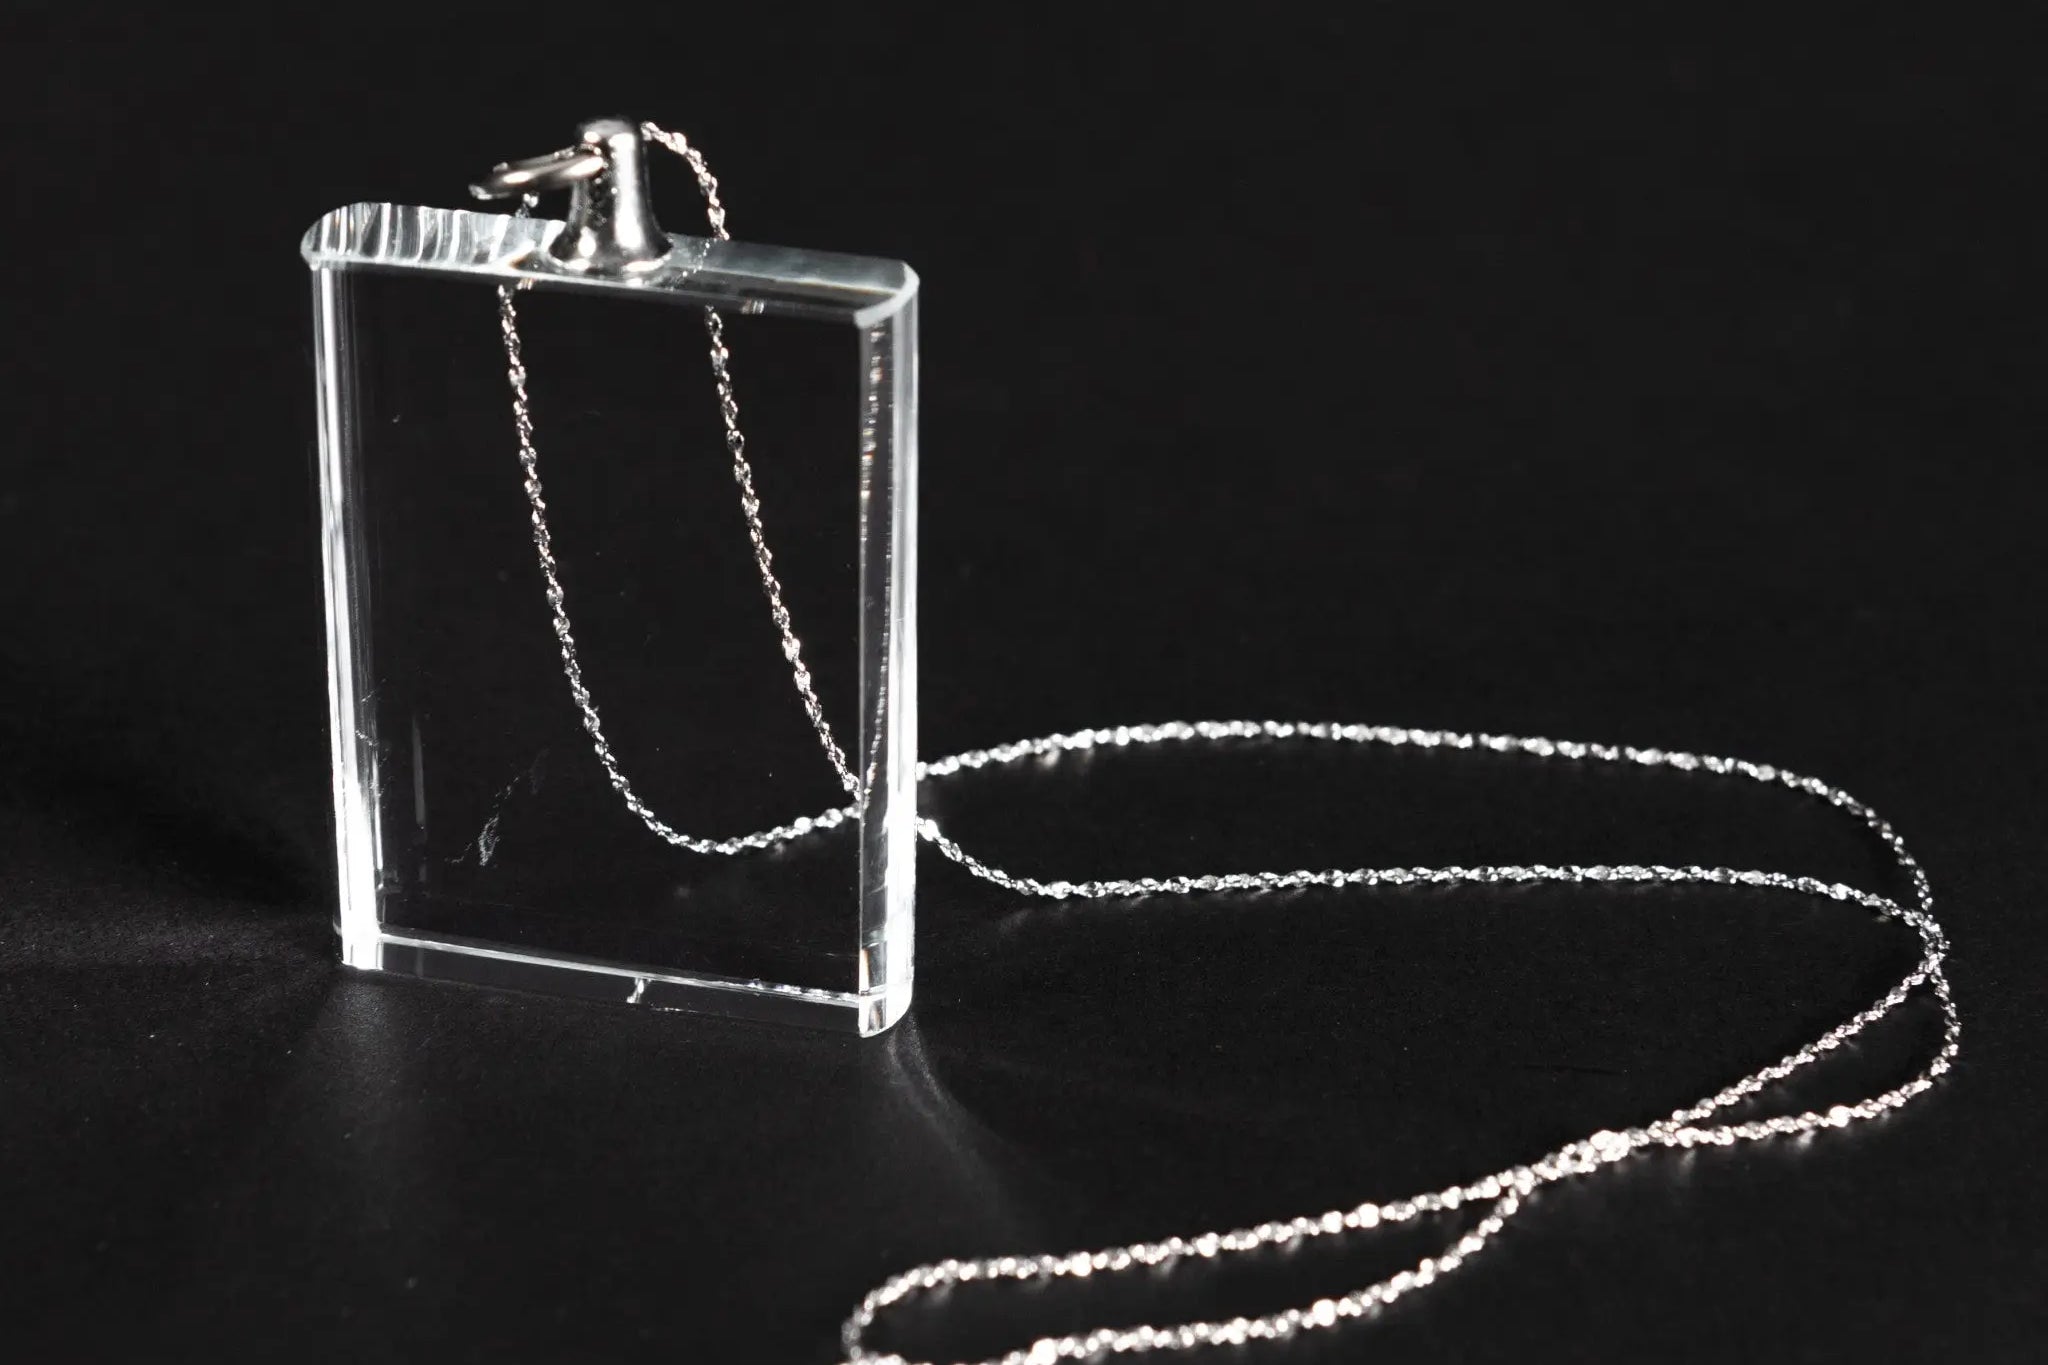 2D Crystal  Necklace with Silver Chain - Customised Crystal Photo Necklace - Forever-Always